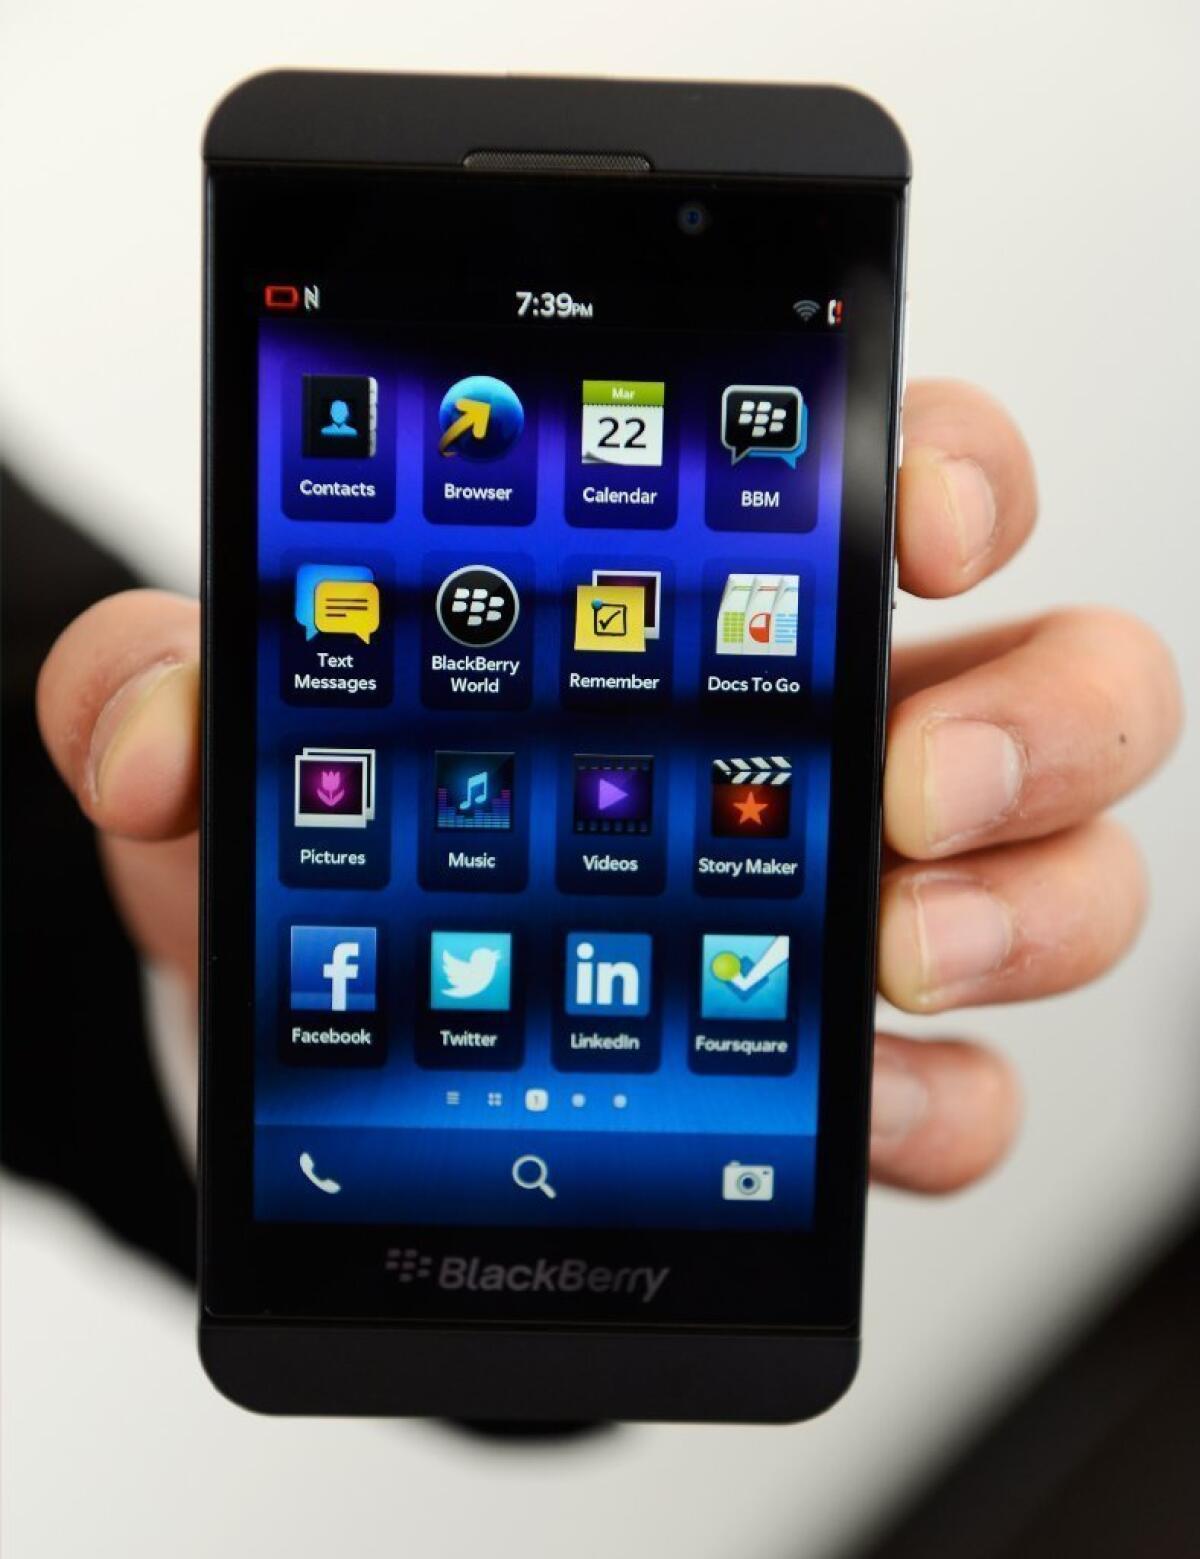 BlackBerry shares tumbled after a downgrade by Goldman Sachs.